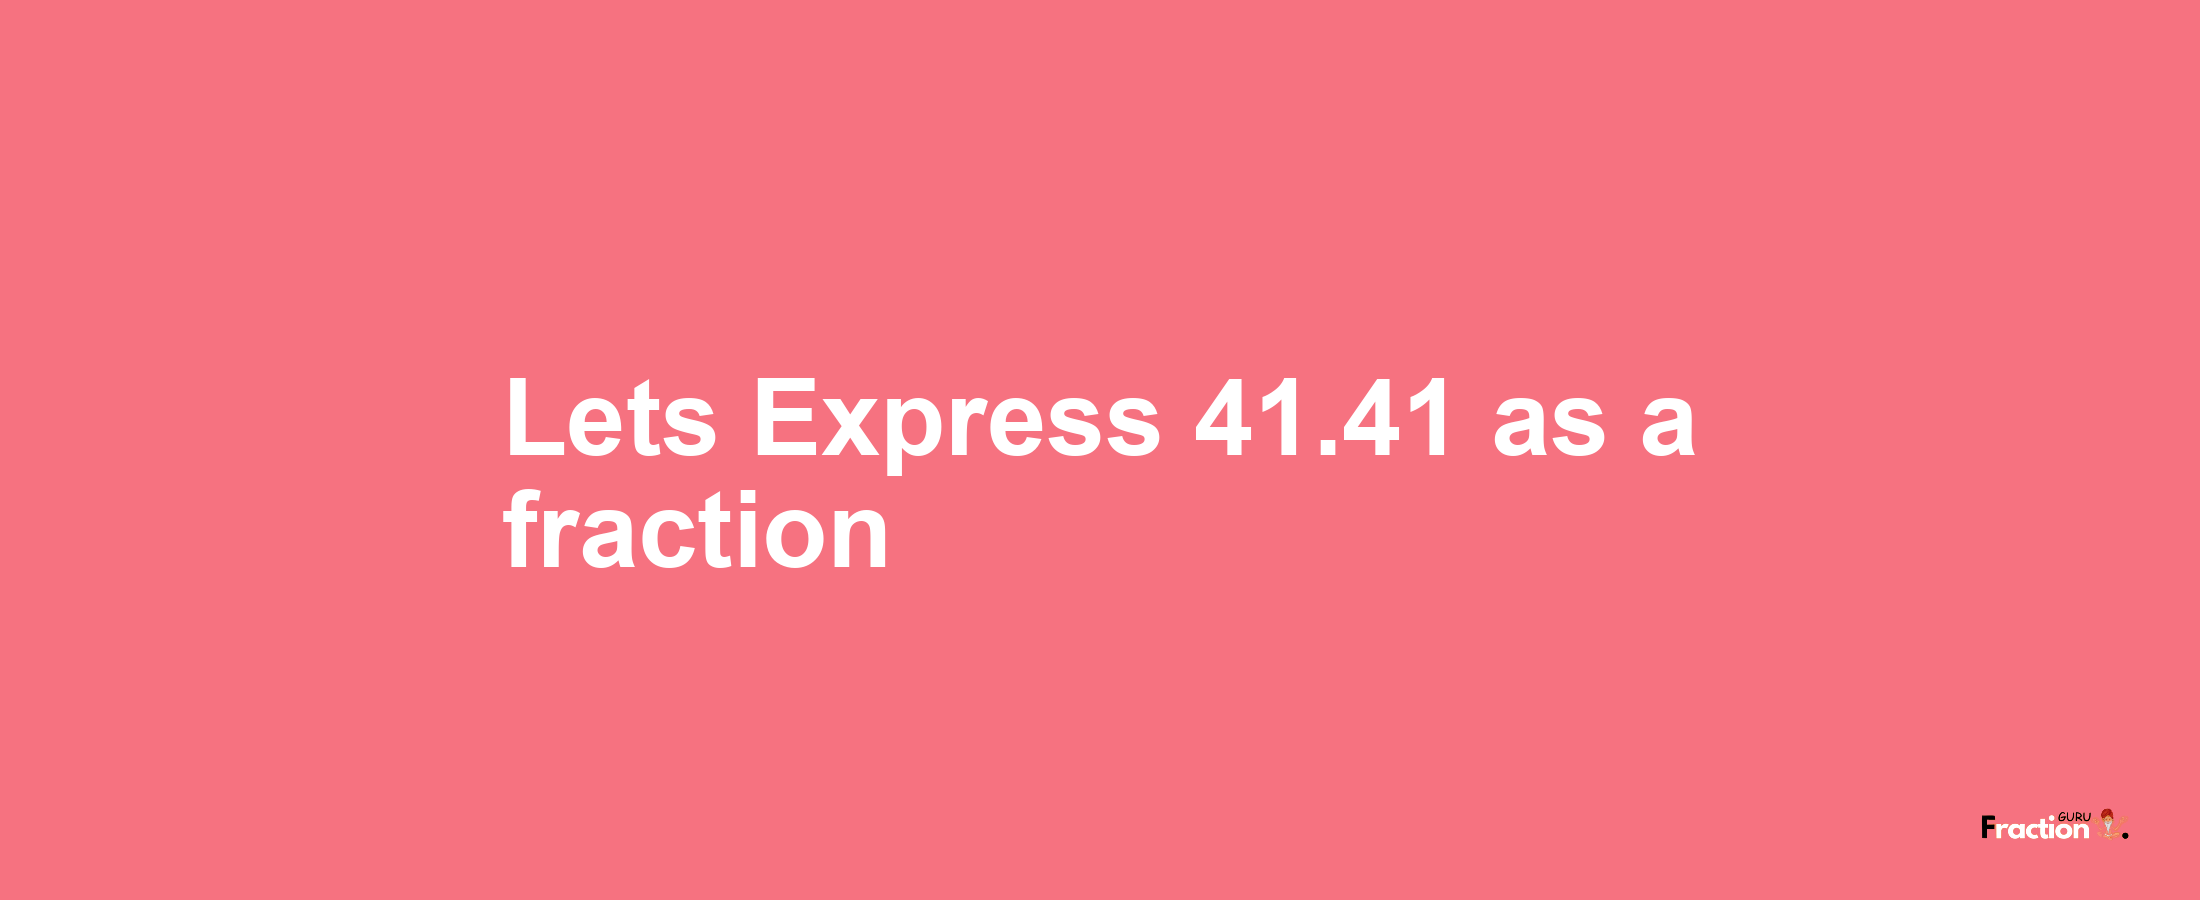 Lets Express 41.41 as afraction